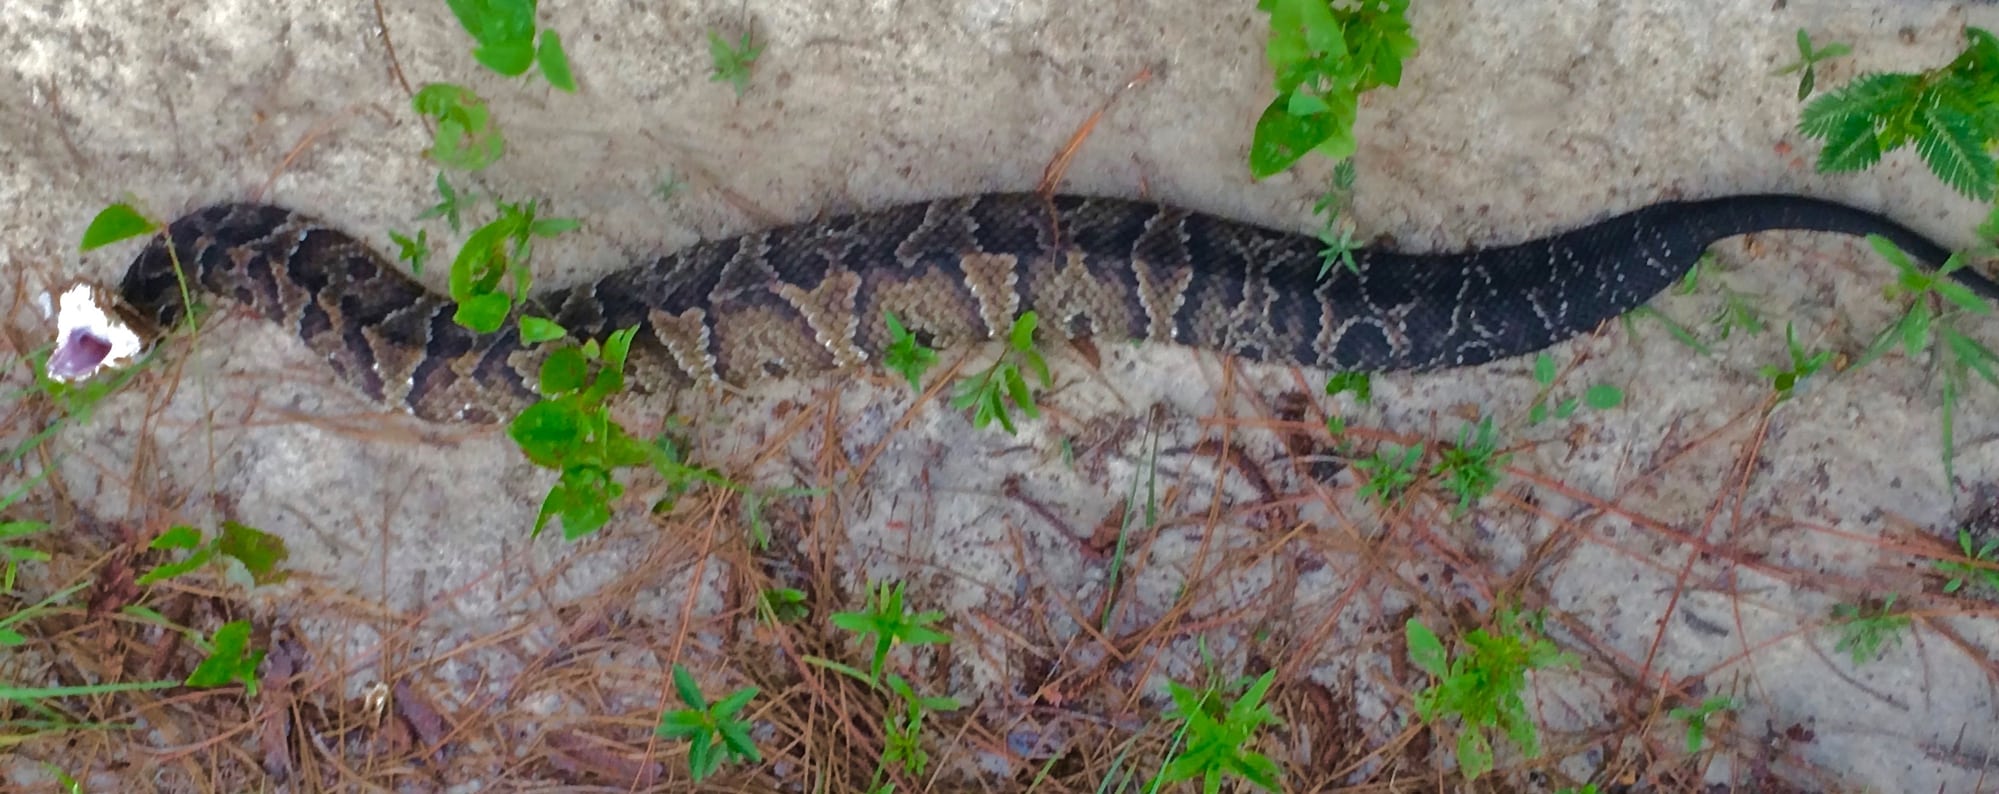 cottonmouth snake in a defensive position on the sand